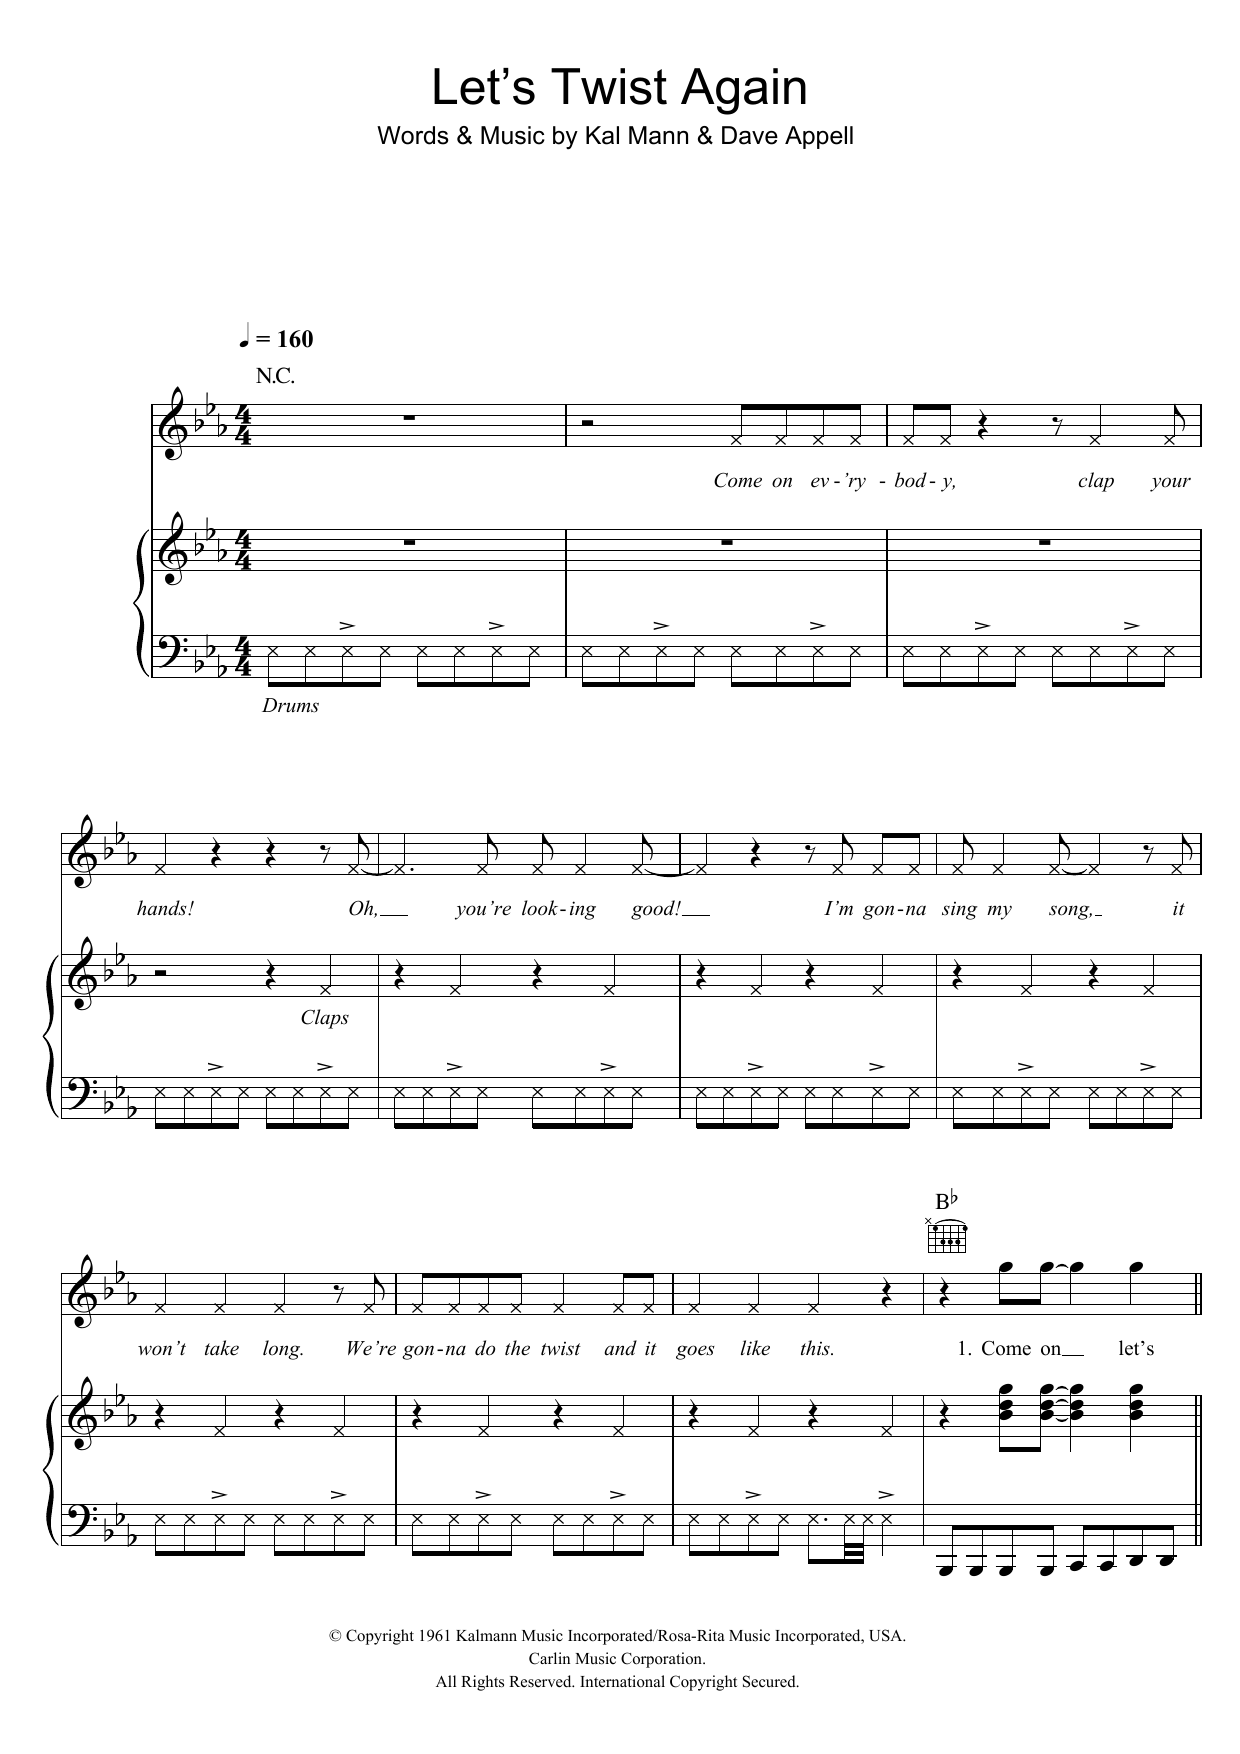 Download Chubby Checker Let's Twist Again Sheet Music